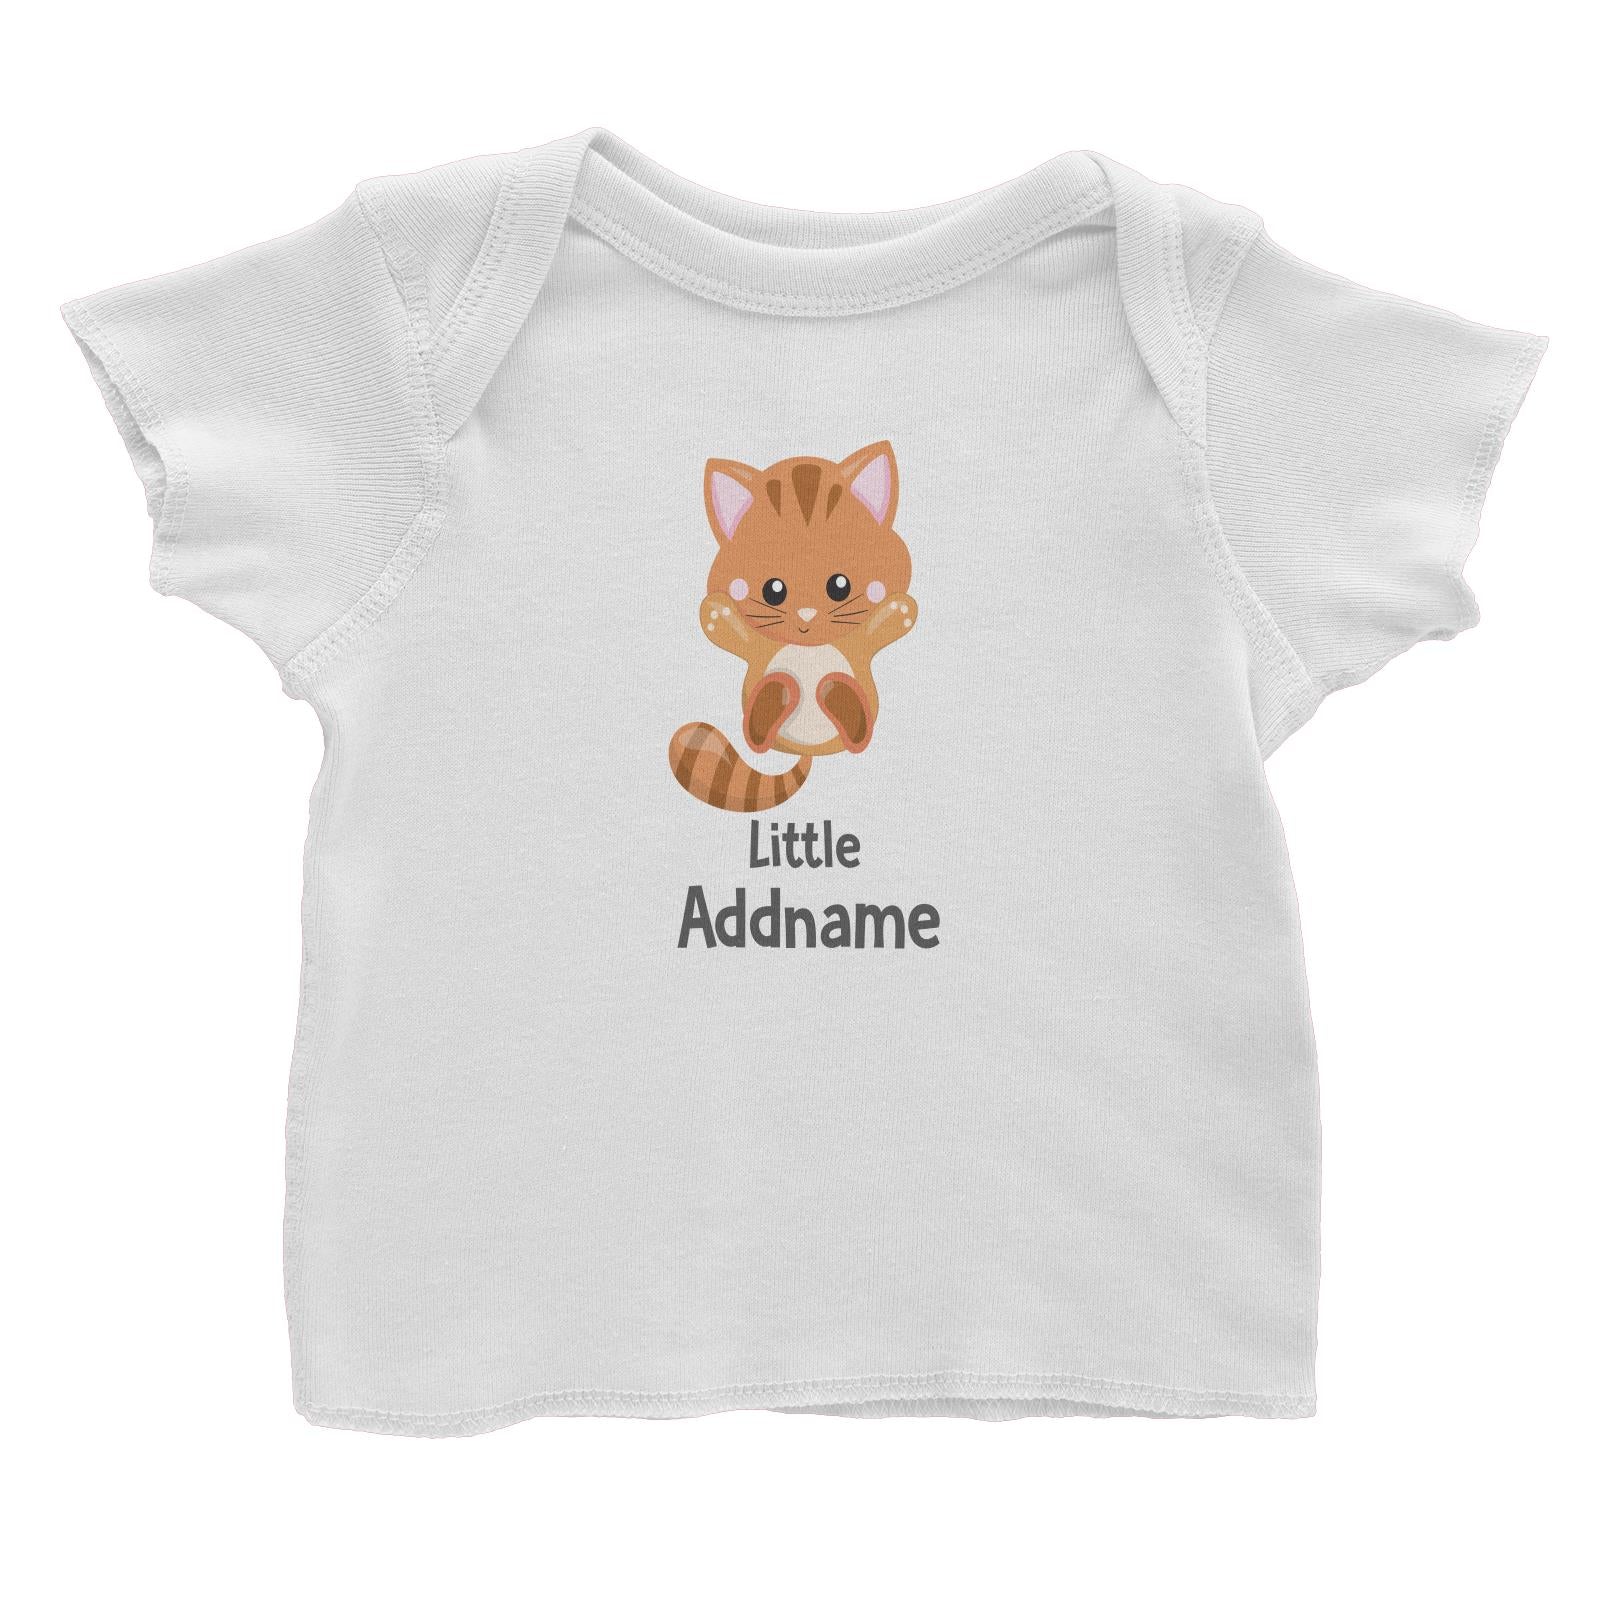 Adorable Cats Orange Cat Little Addname Baby T-Shirt